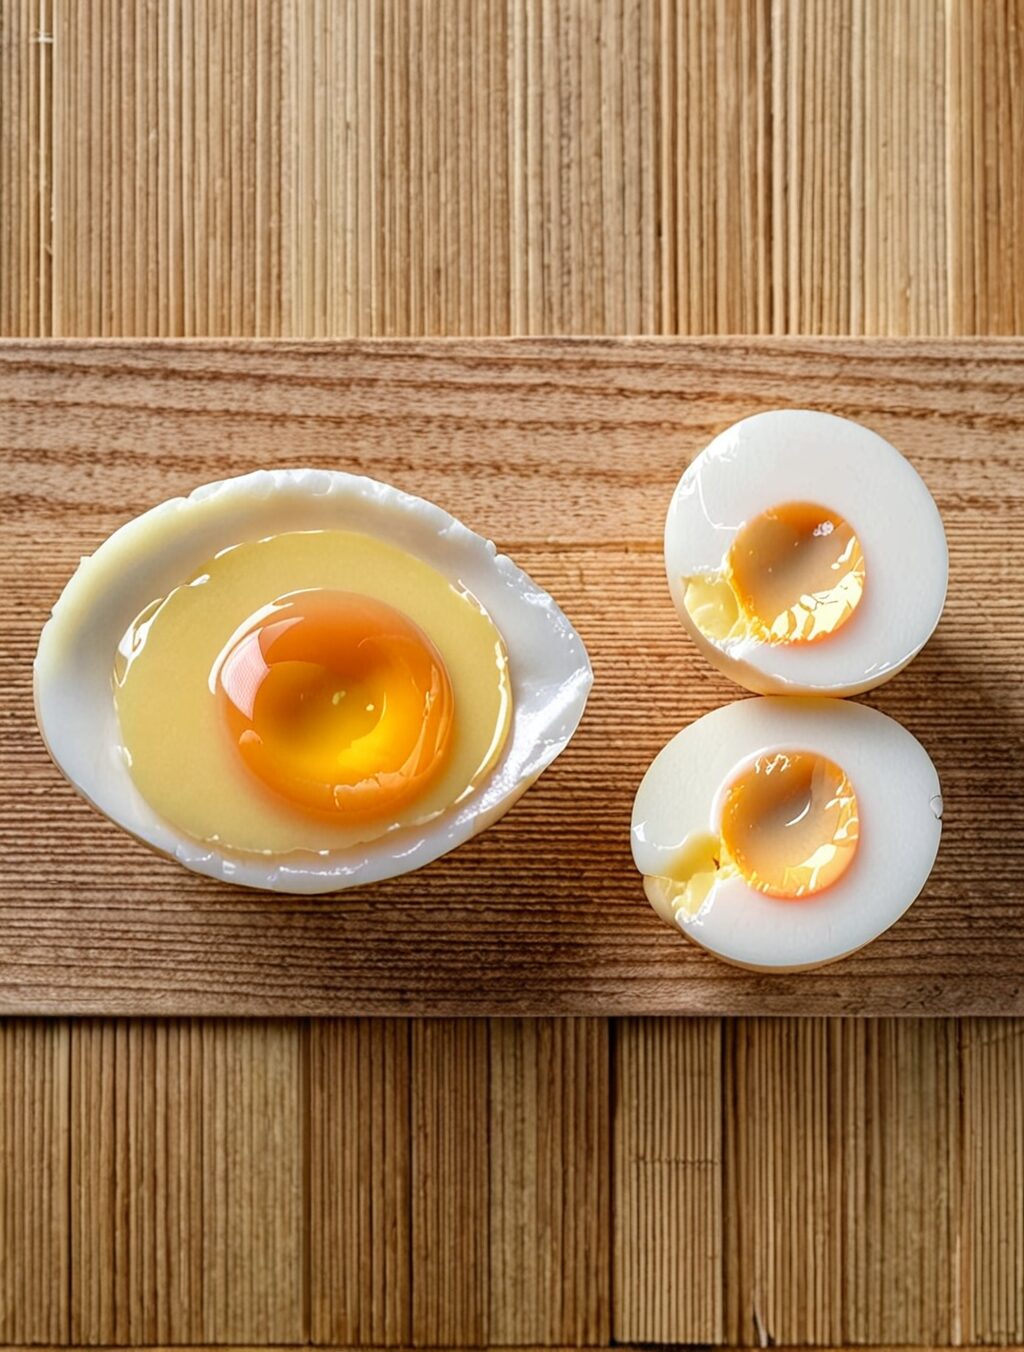 why can you eat raw eggs in japan but not america